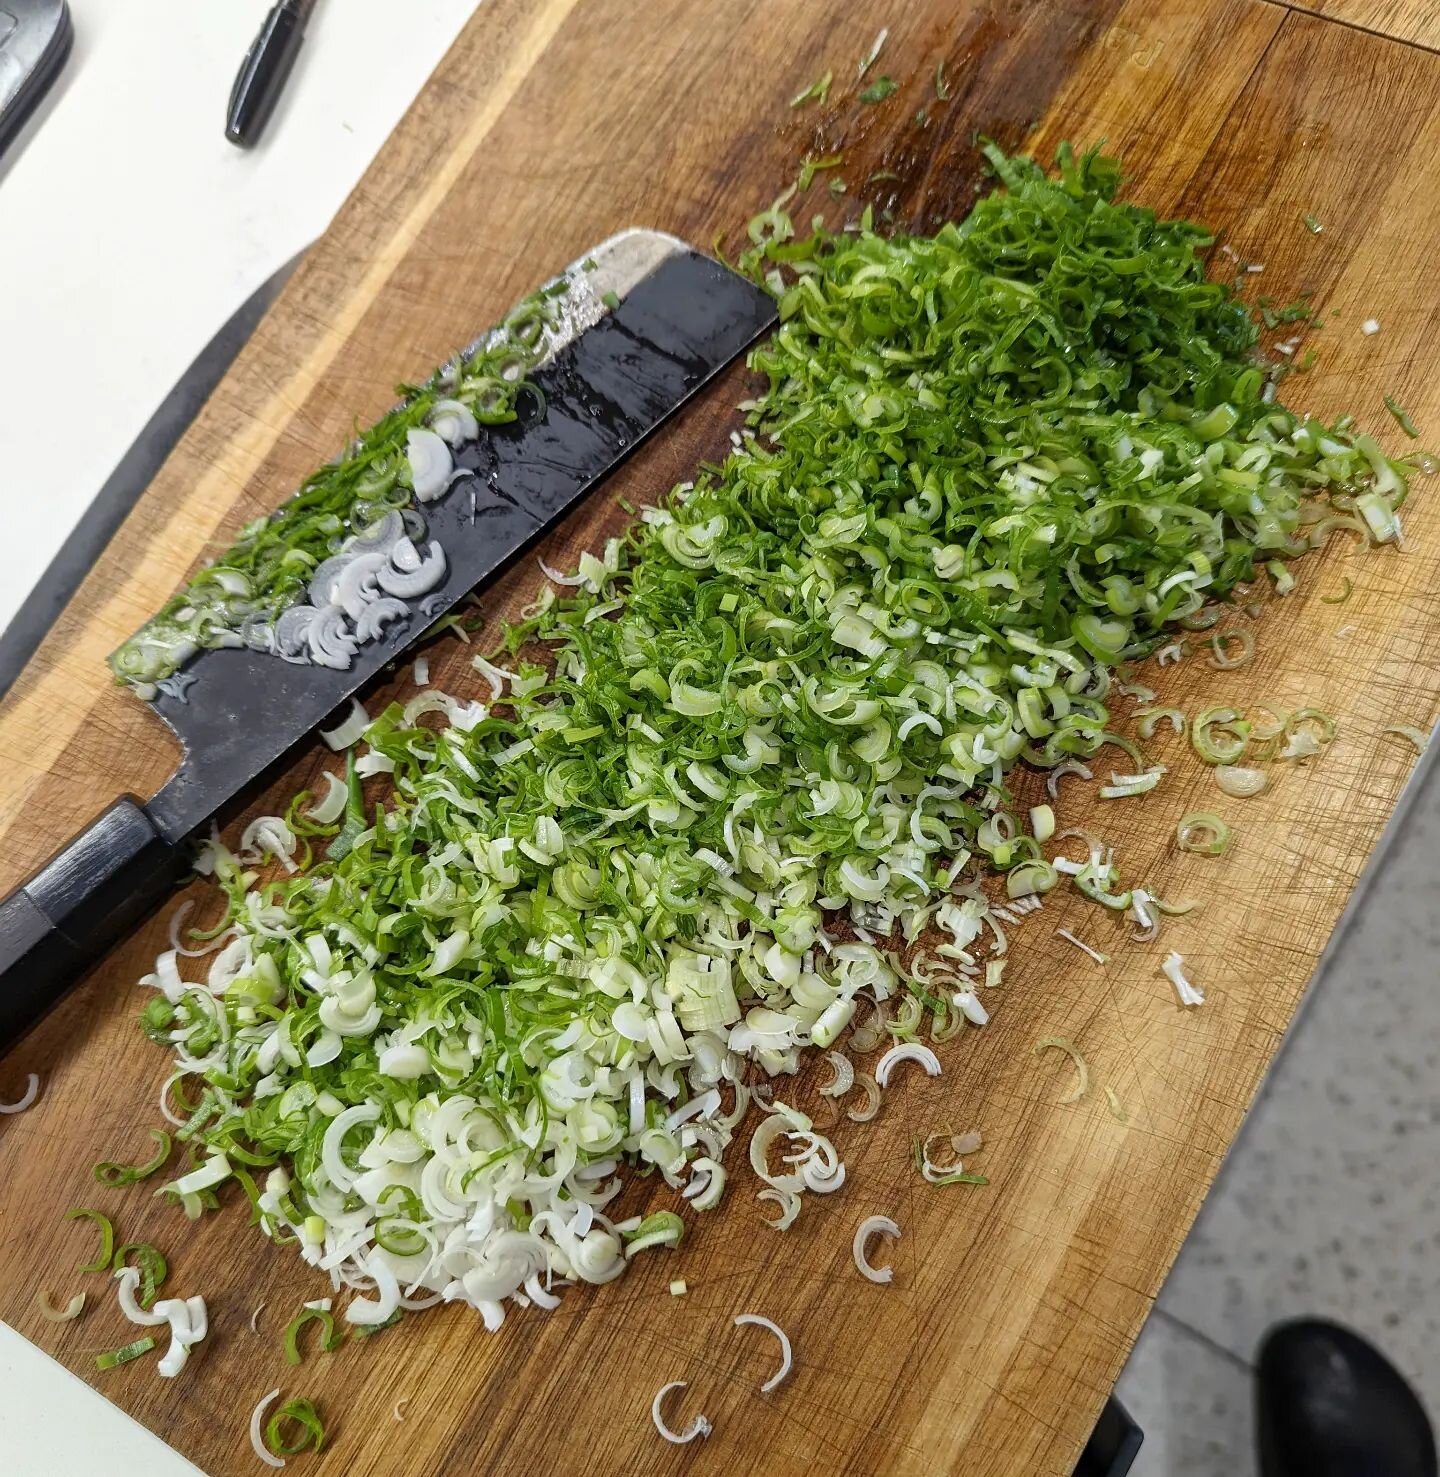 The gradient of spring onion. Sharp knives are essential for herb and delicate vegetable prep, resulting in herbs that stay vibrant and fresh after being cut but also have a cleaner, fresher taste. Especially in the case of aliums (garlic and onion f